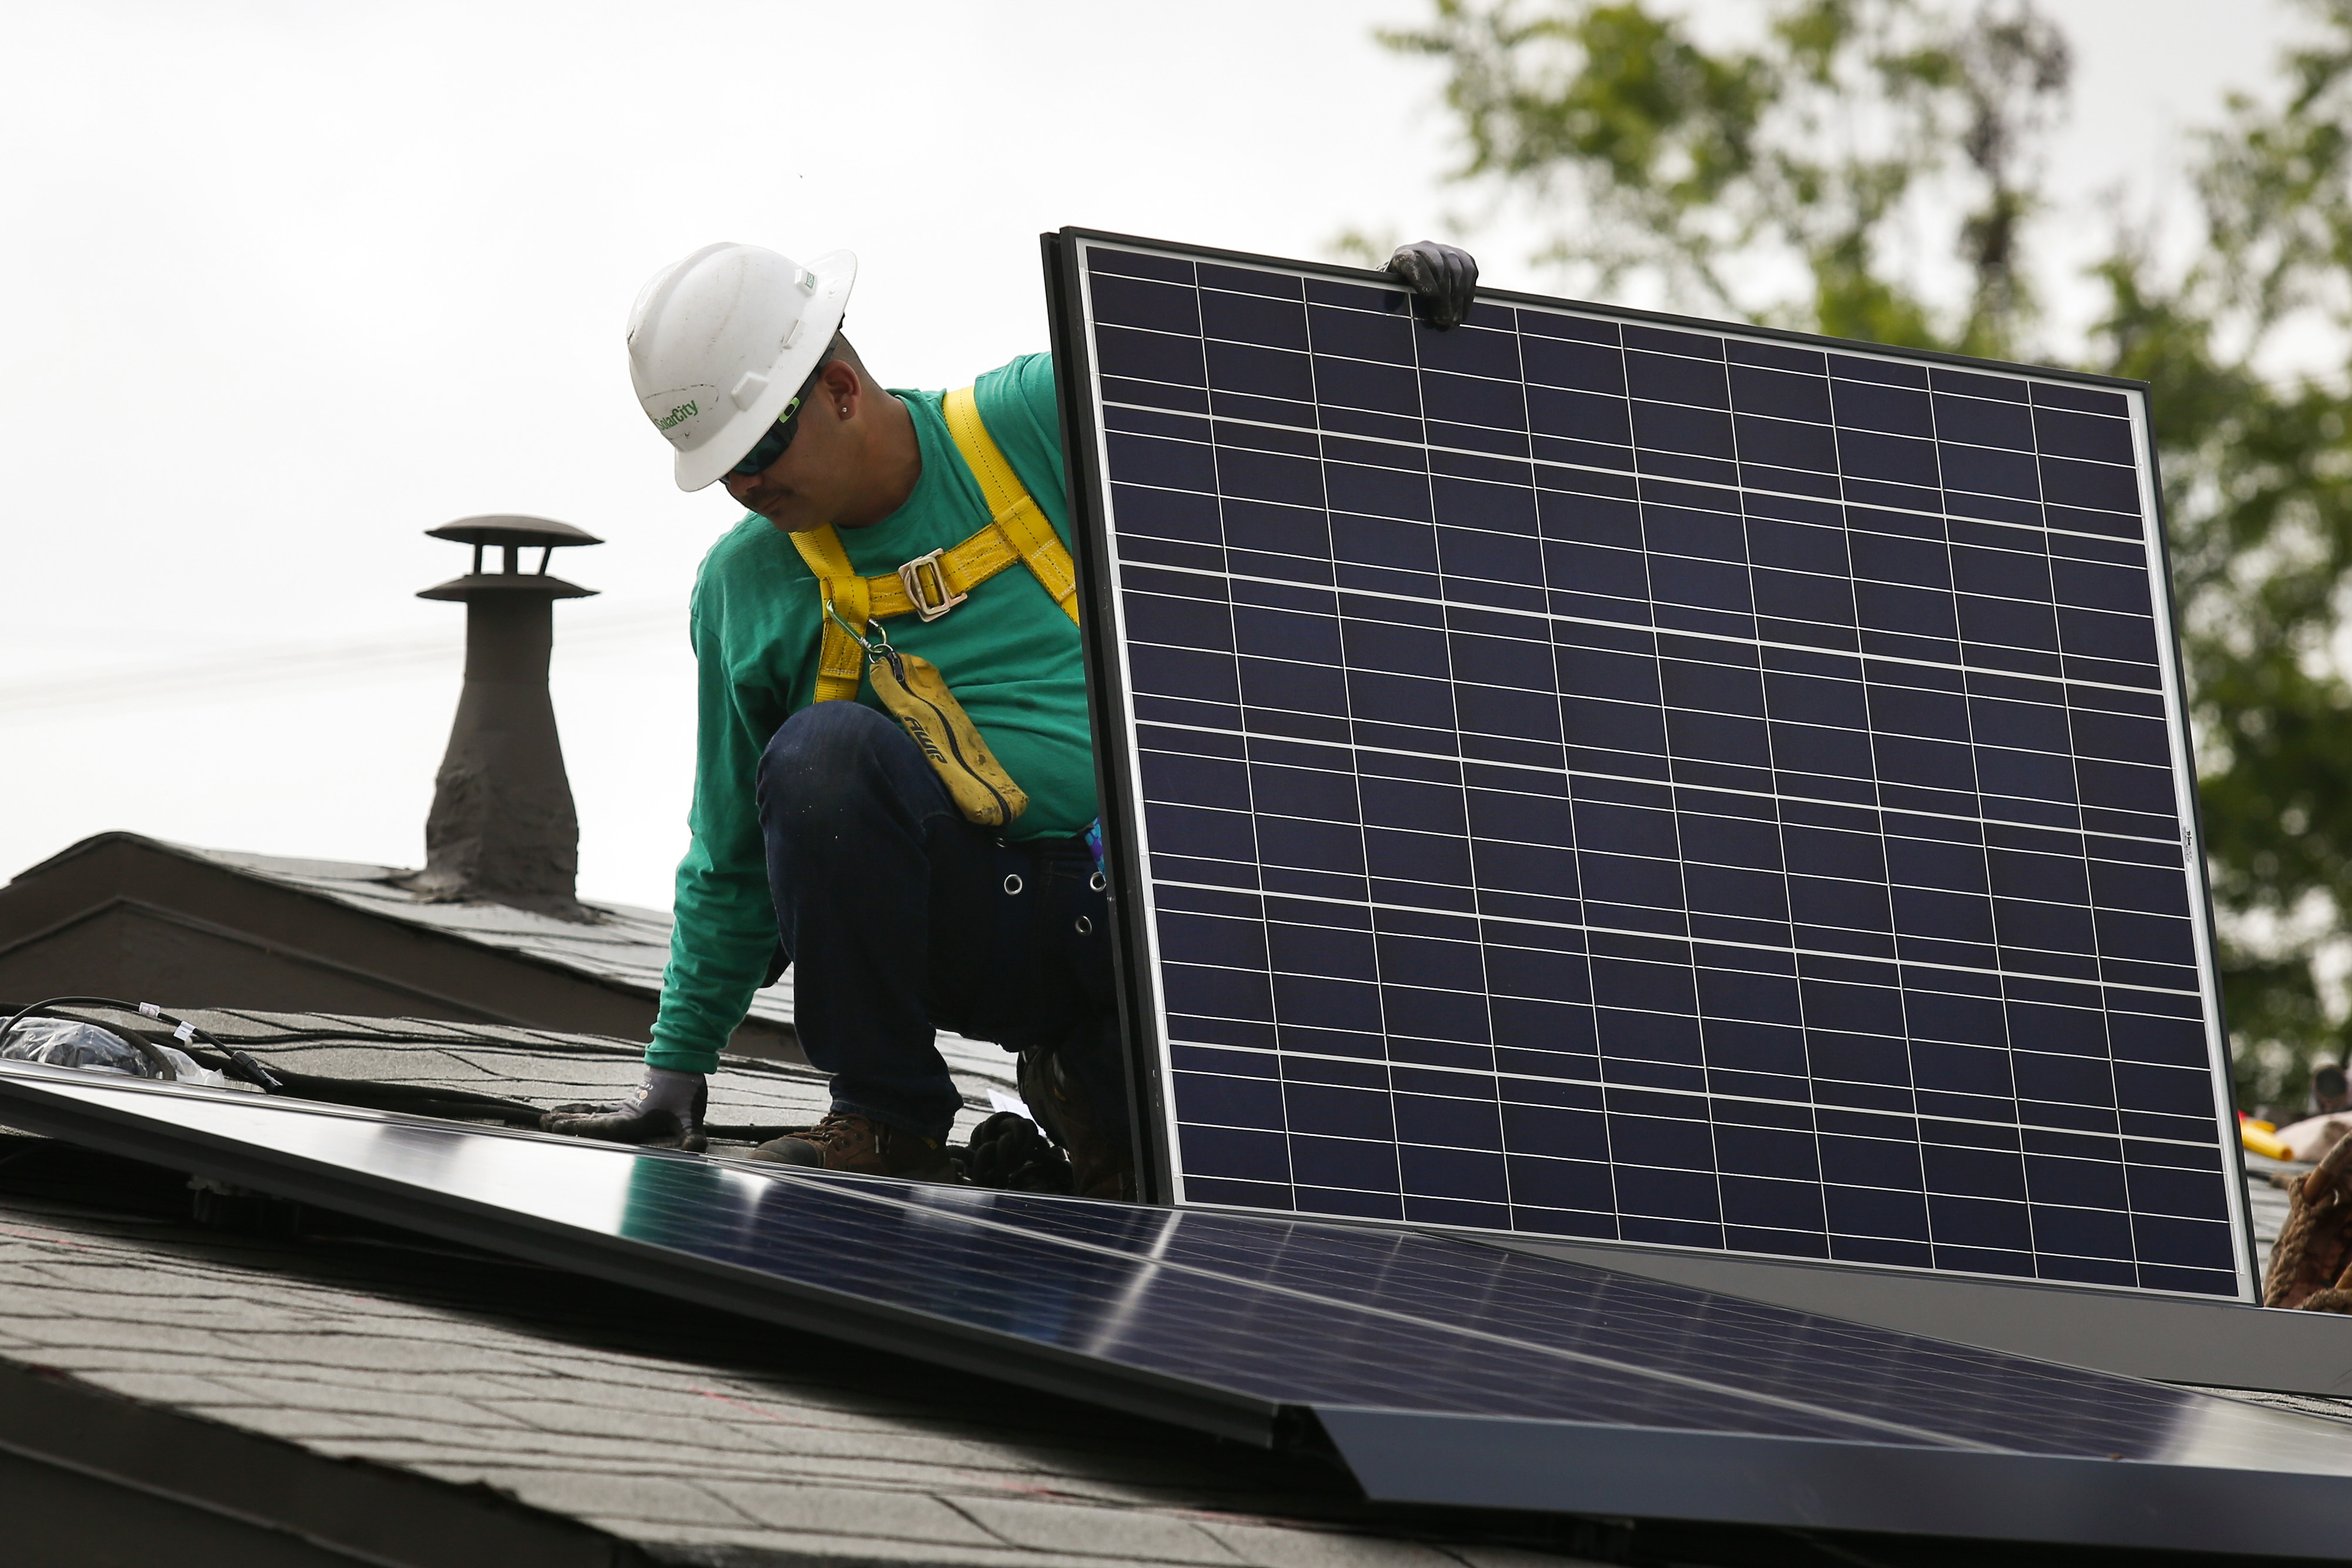 An employee installs a solar panel on the roof of a home in Los Angeles. Photographer: Patrick T. Fallon/Bloomberg via Getty Images (Bloomberg&mdash;Bloomberg via Getty Images)